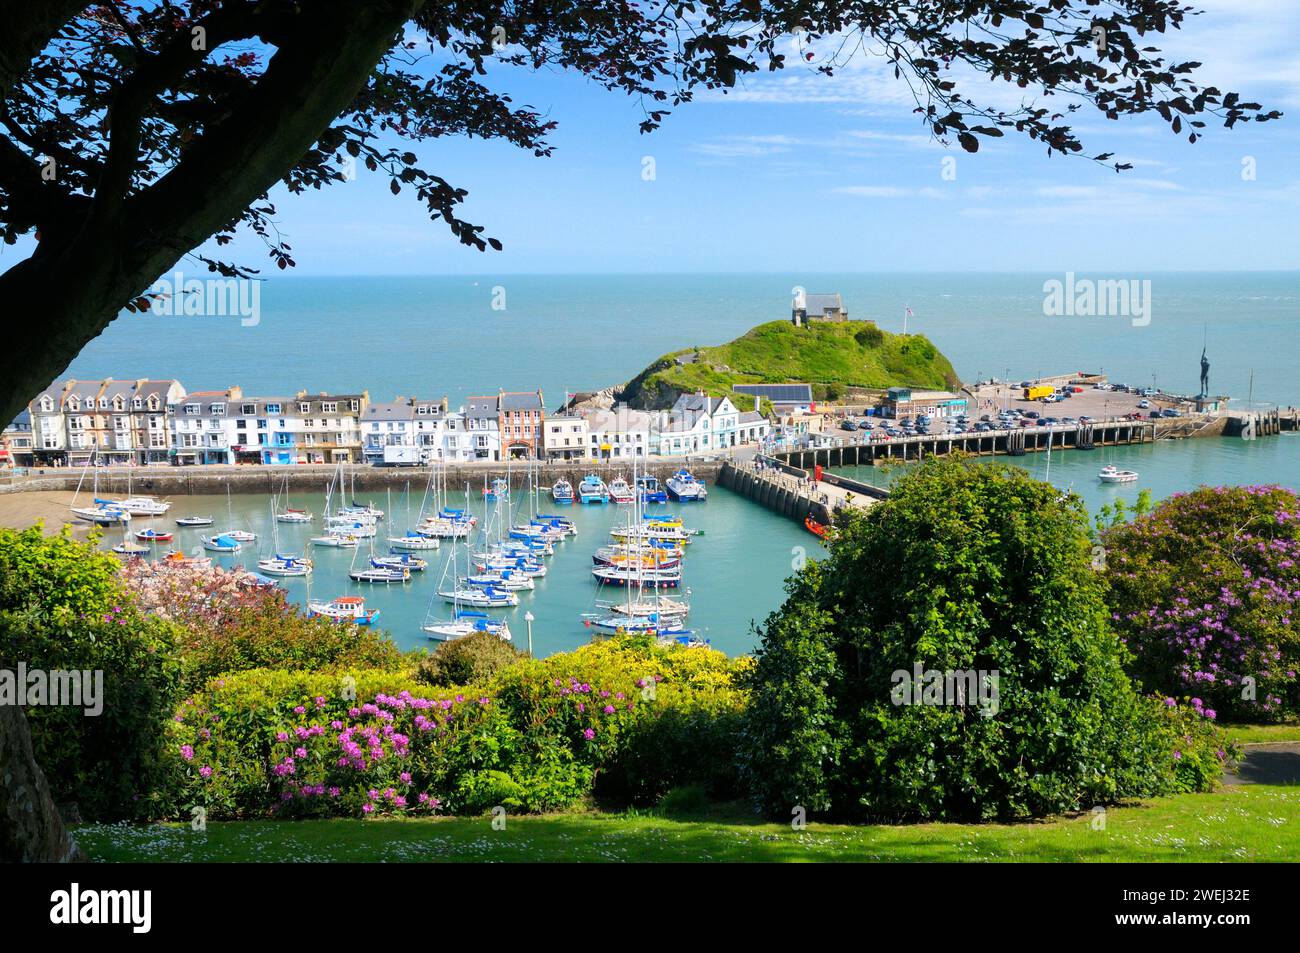 Sunny sea view of Ilfracombe with boats and yachts in harbour and buildings along the quay beneath St Nicholas Chapel, North Devon coast, England, UK Stock Photo